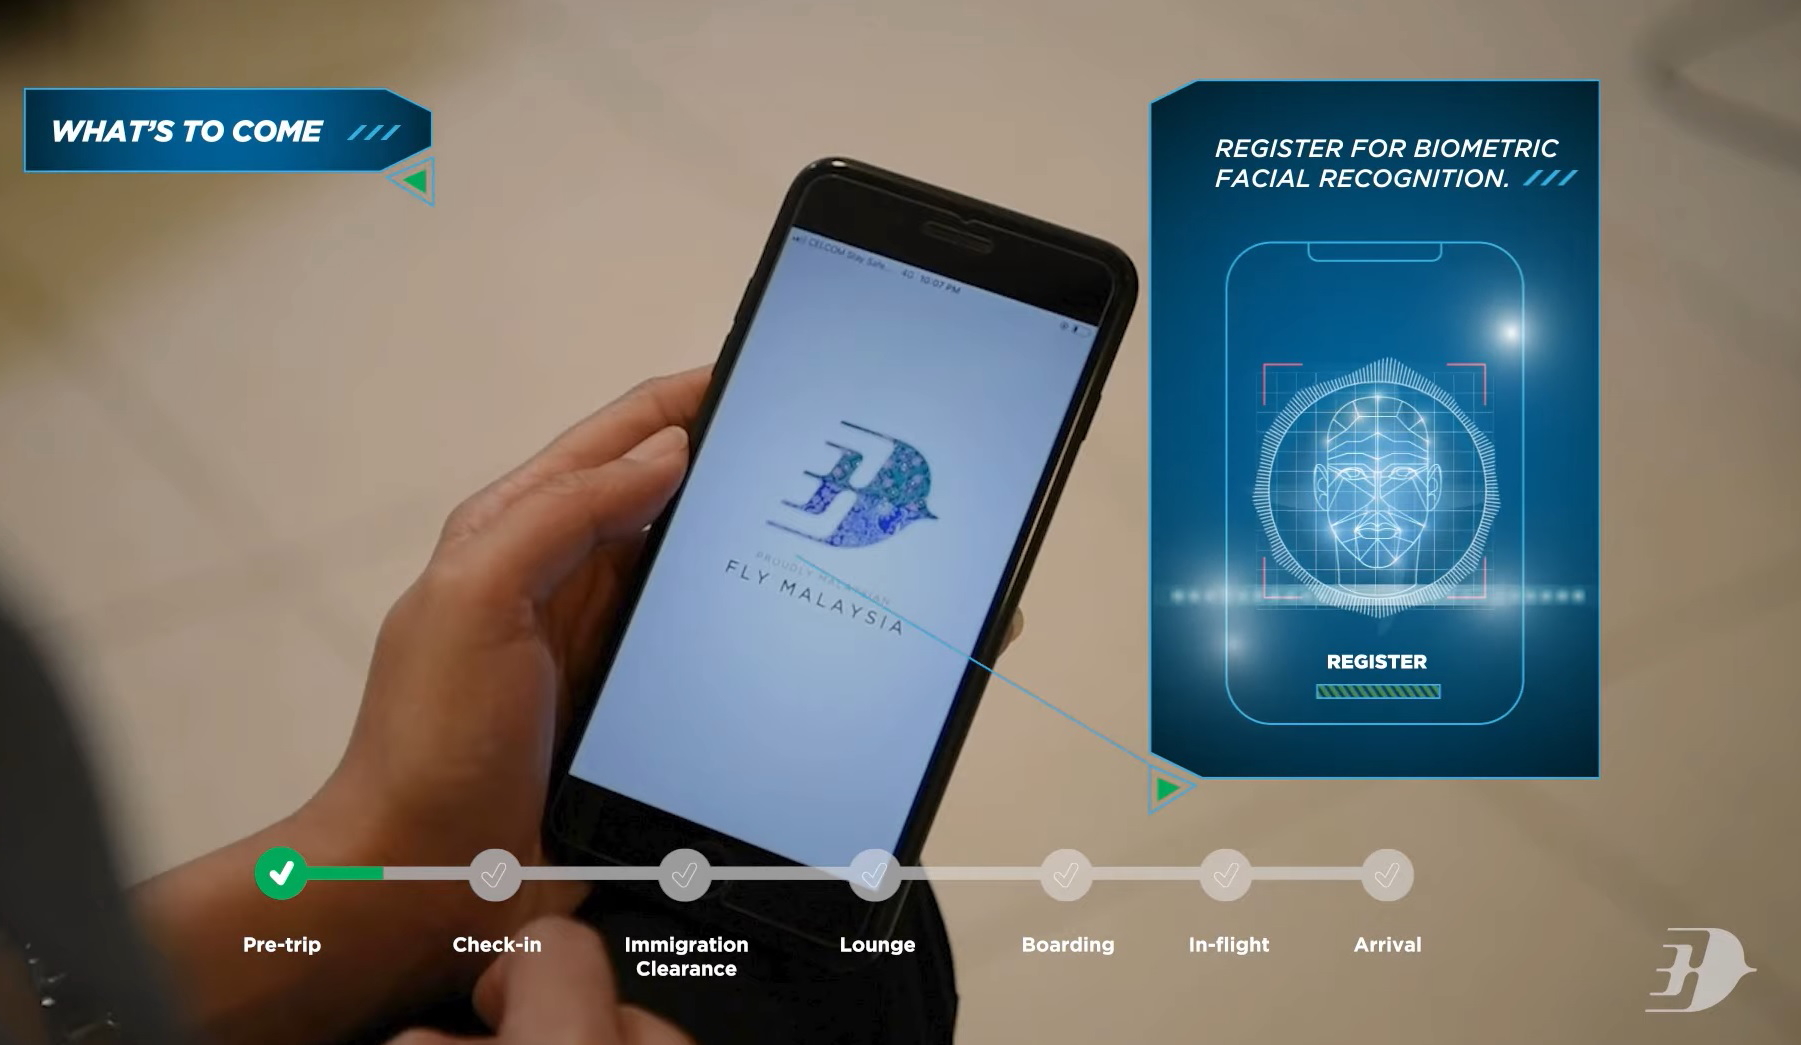 Biometric facial recognition technology will take over several boarding procedures and verifications of travel documents, offering a hassle-free and contactless check-in, security clearance and boarding processes. Click to enlarge.